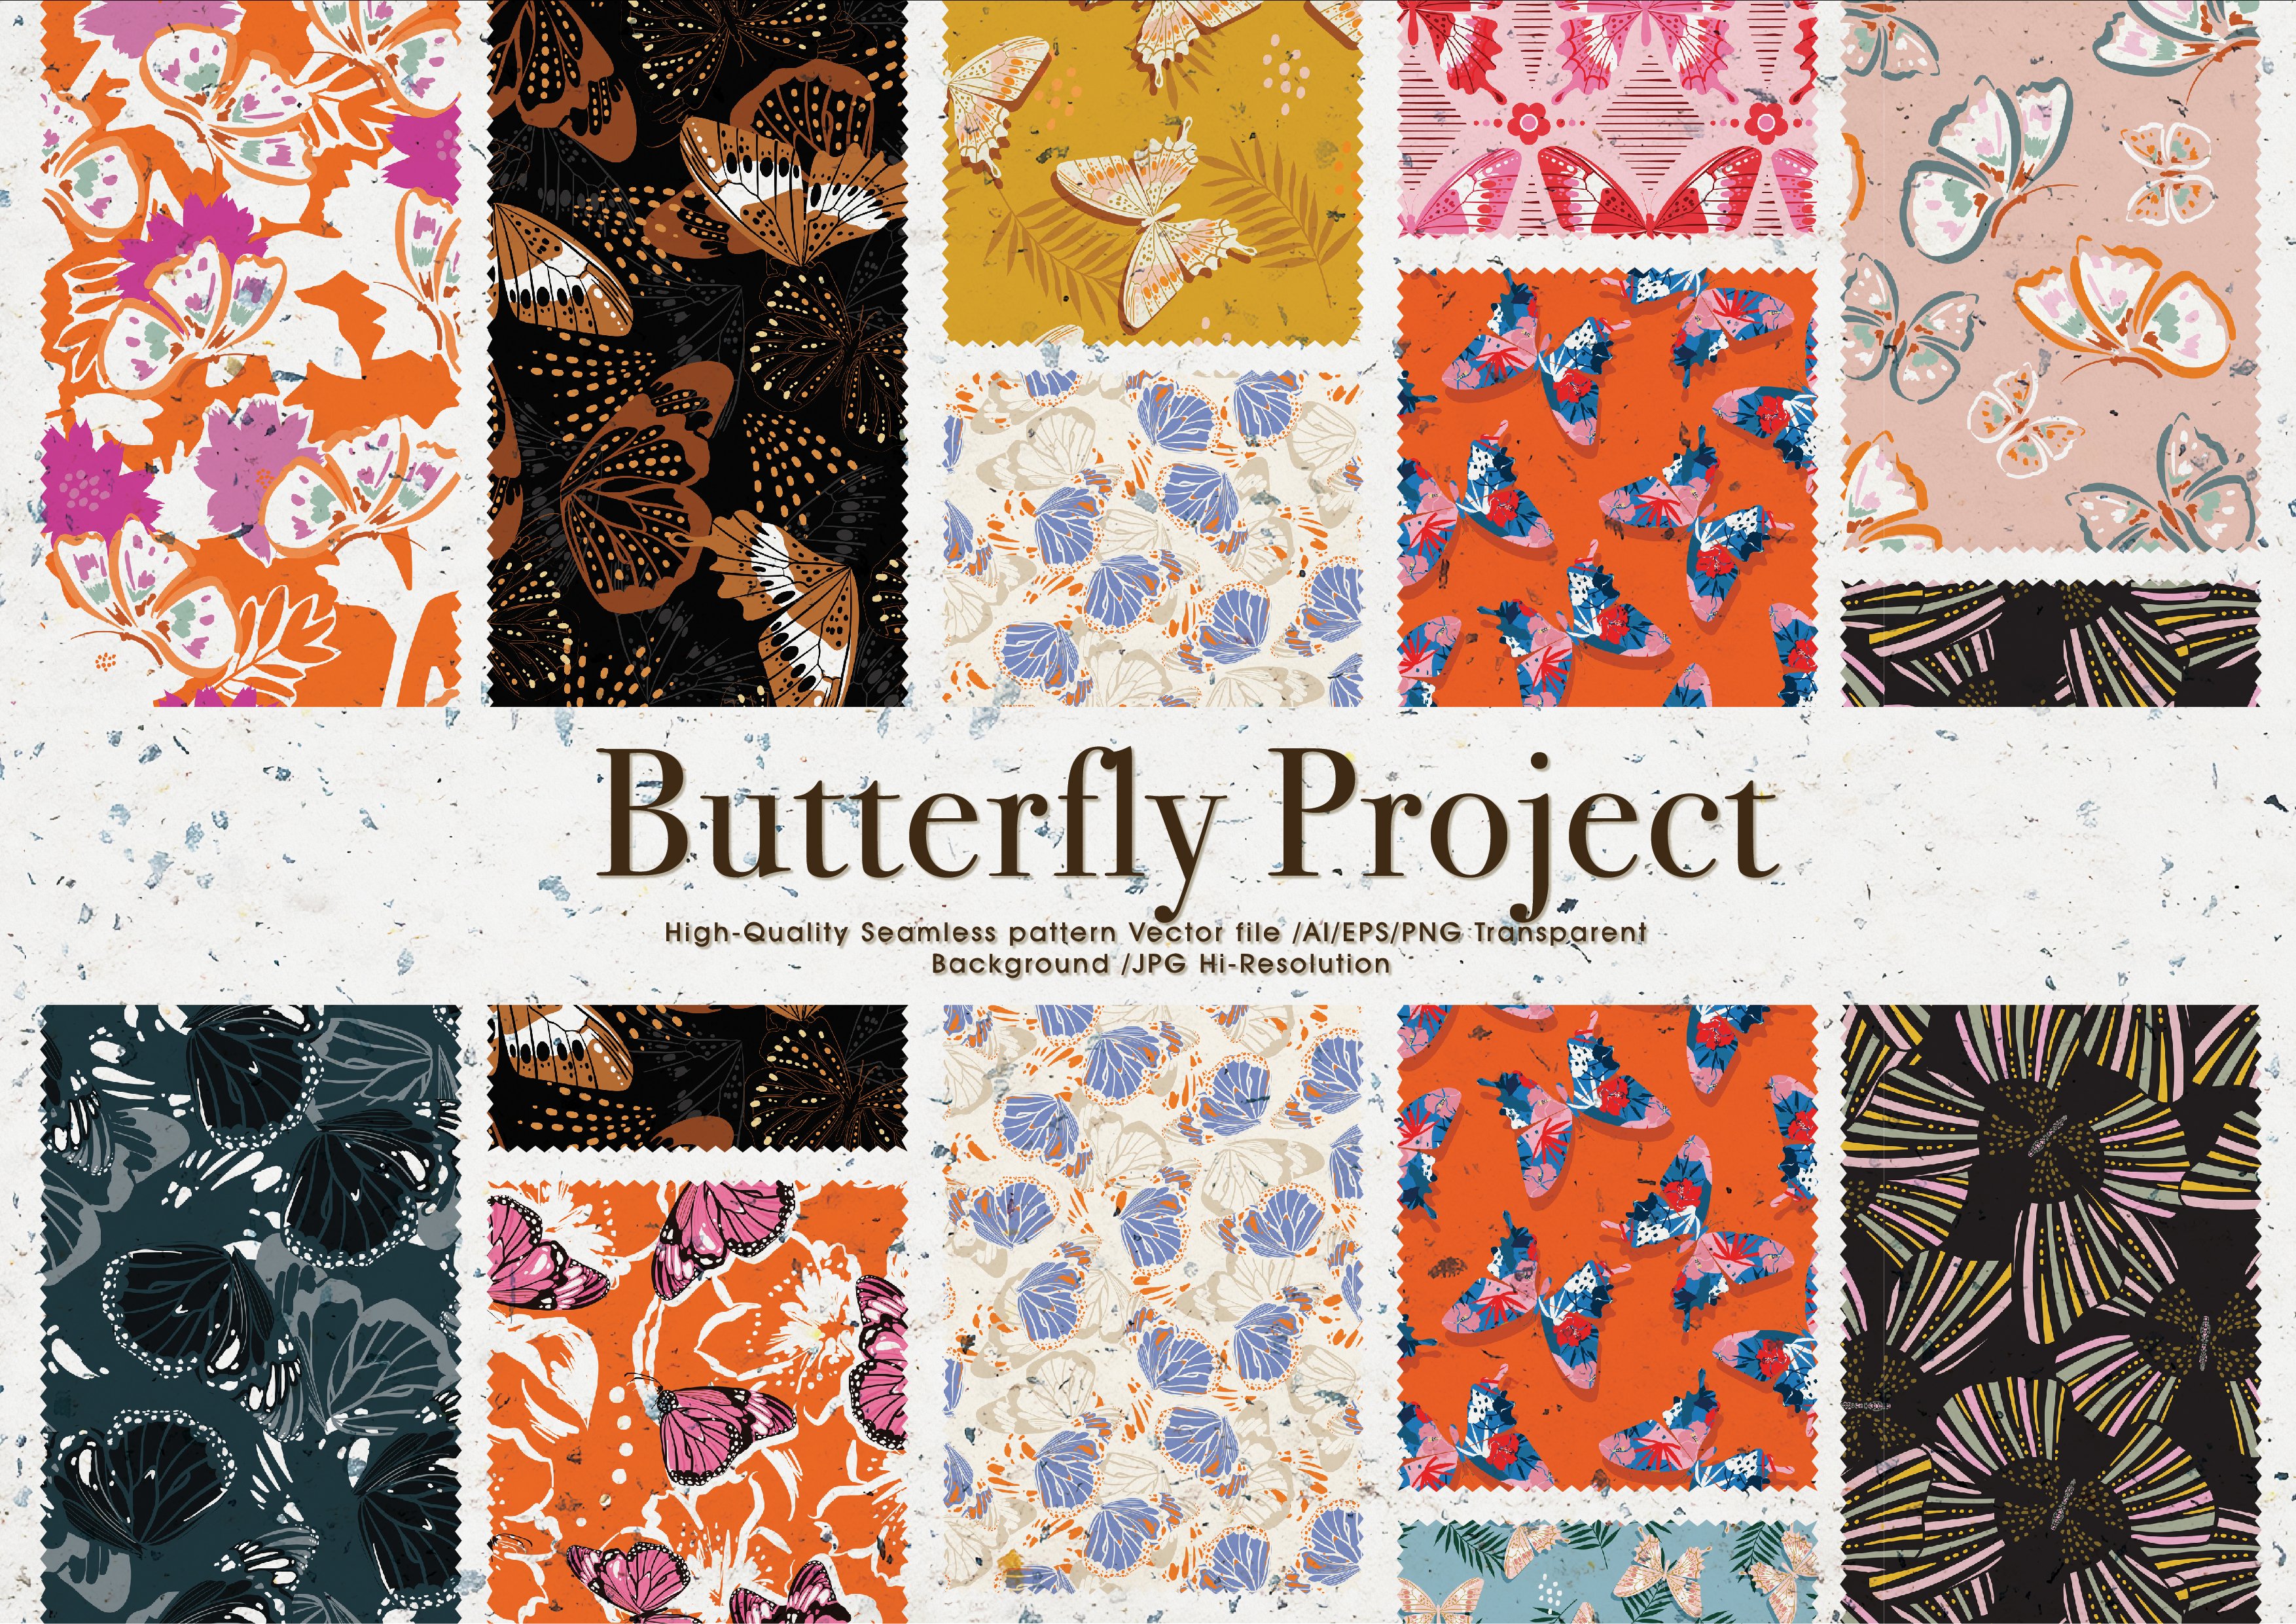 Butterfly Project cover image.